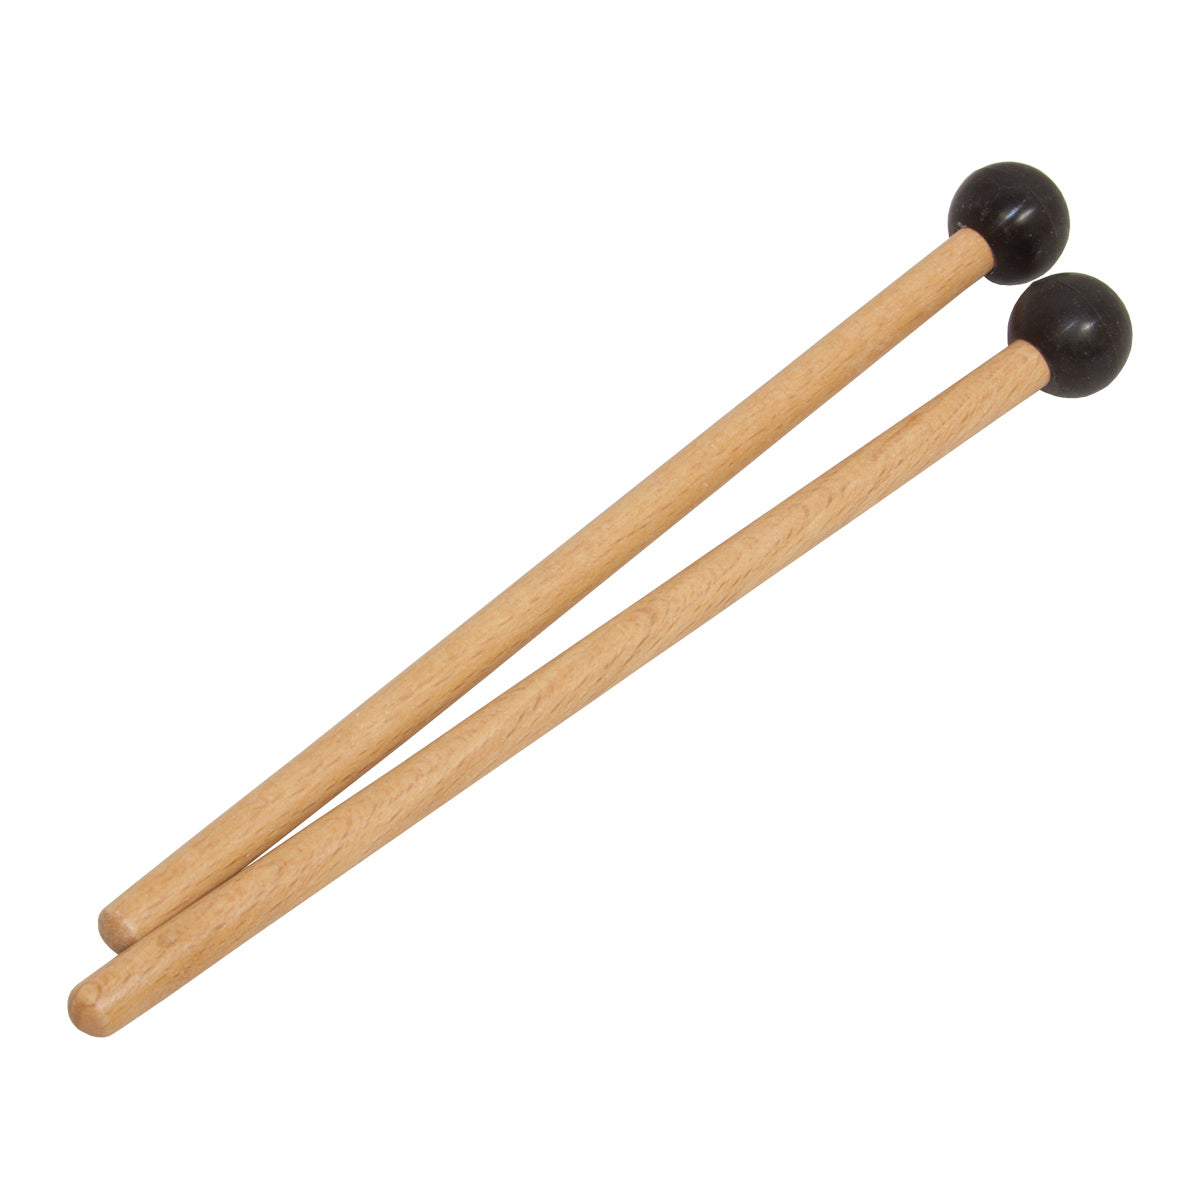 Idiopan 7-Inch Mallets with .75-Inch Ball - Pair - Black